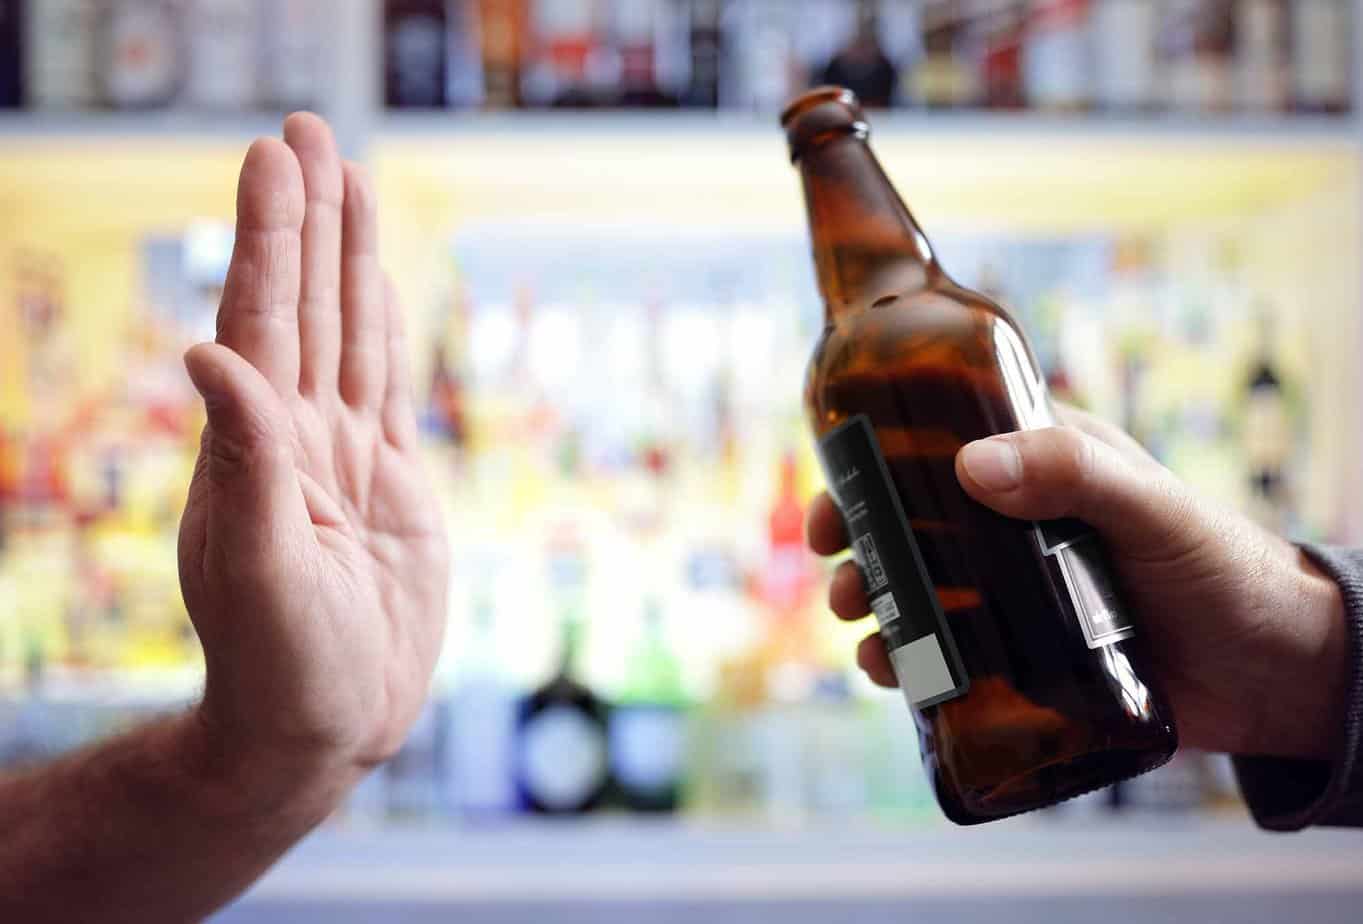 putting up hand to refuse alcohol